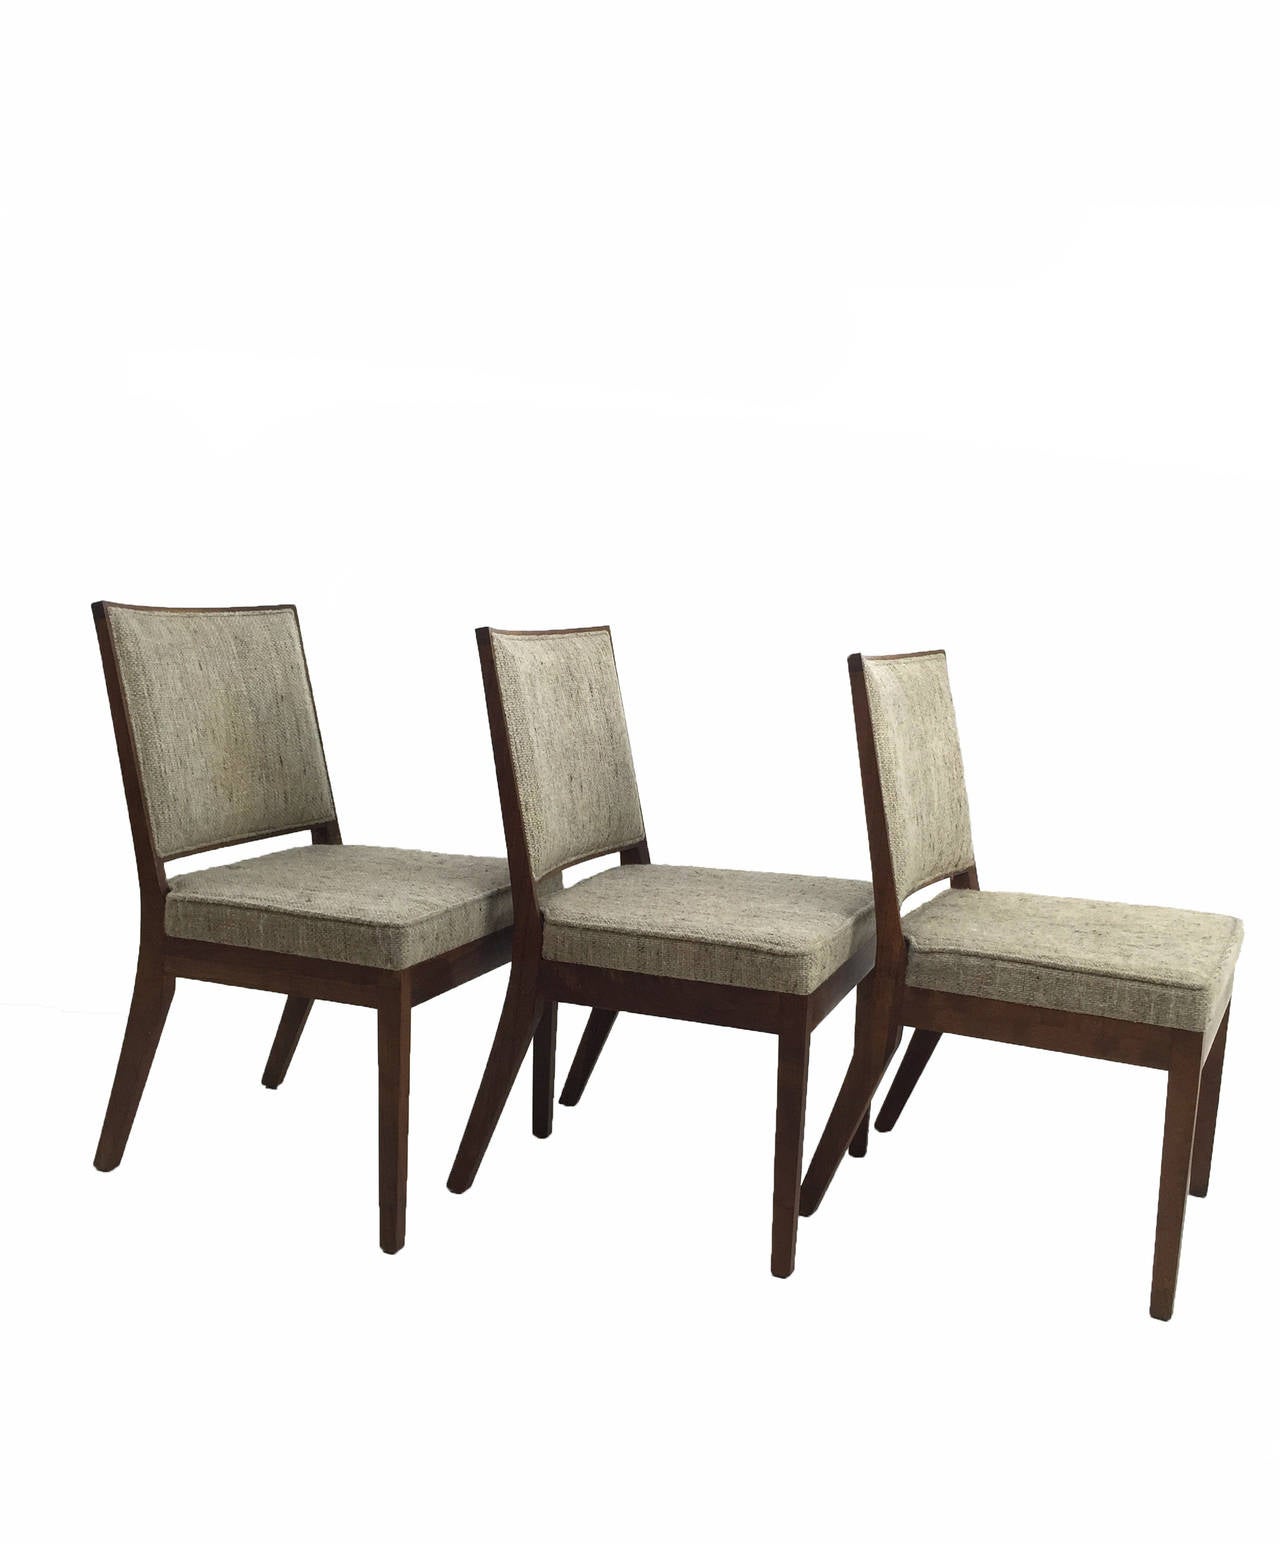 John Kapel for Glenn Walnut Dining Chairs In Good Condition For Sale In Berkeley, CA